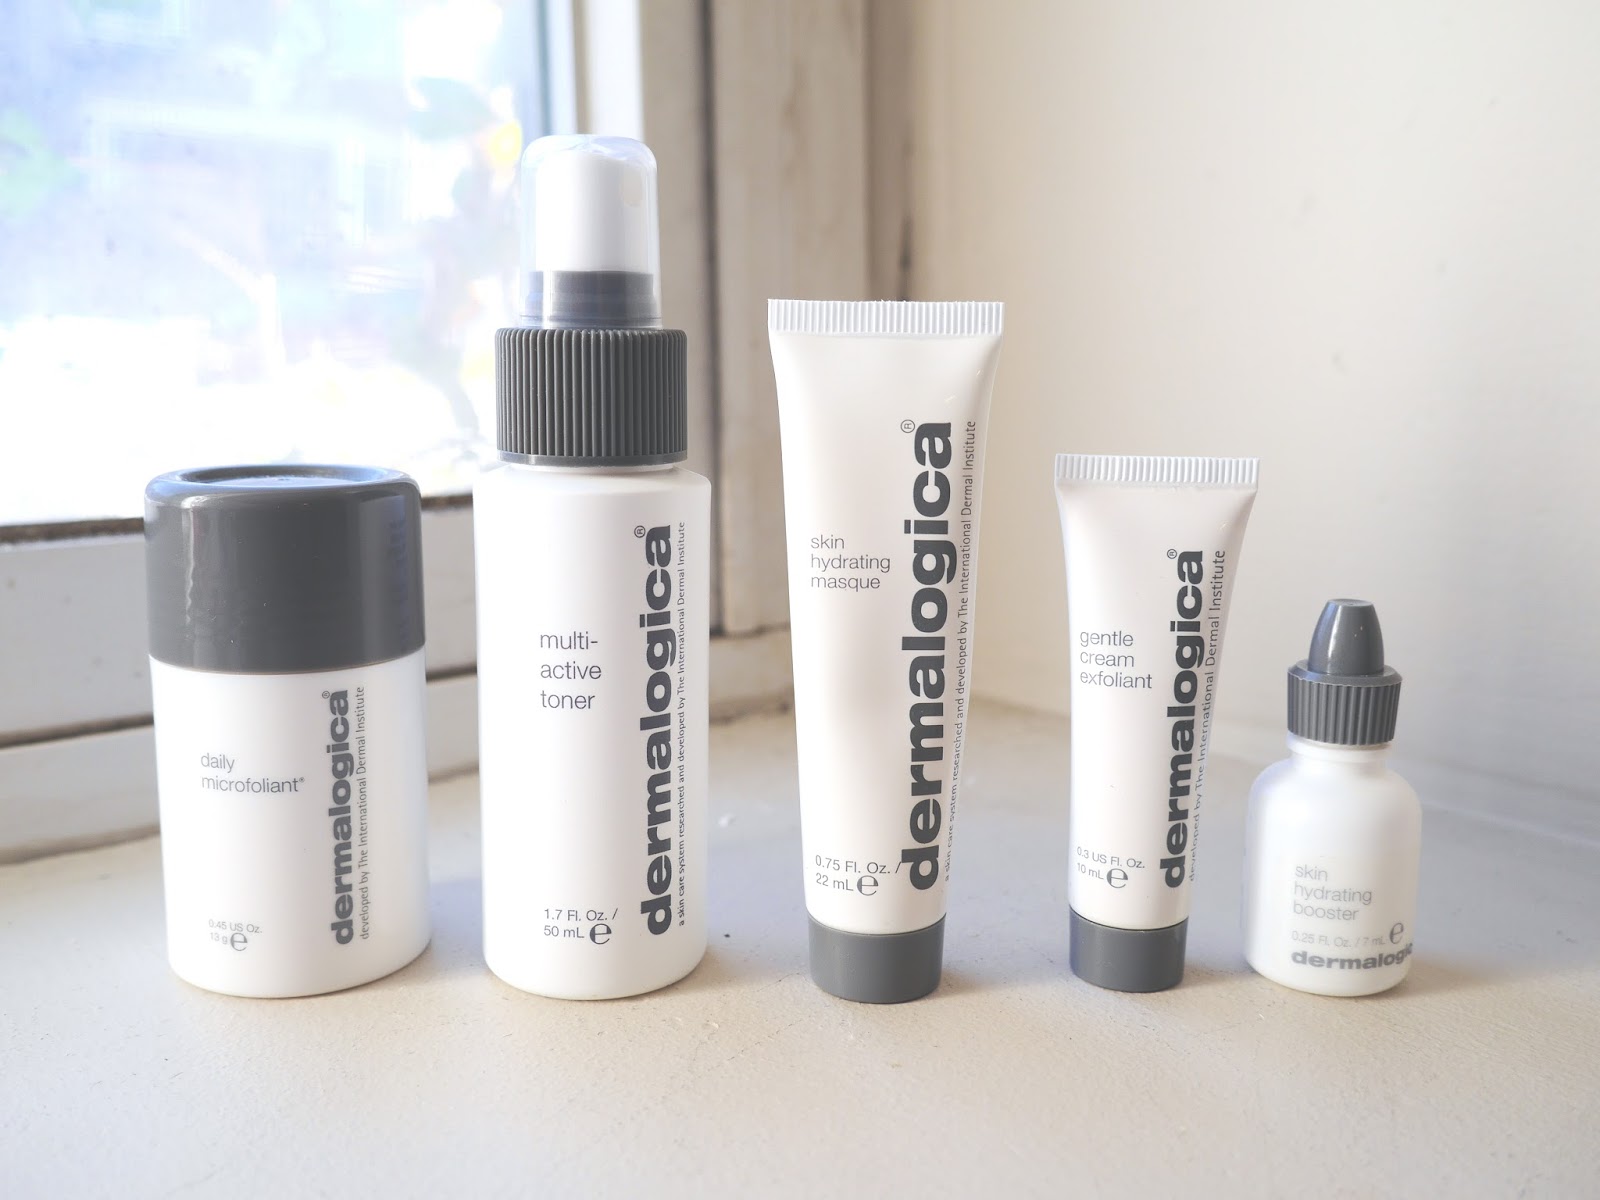 dermalogica daily microfolient multi-active toner skin hydrating masque gentle cream exfoliant skin hydration booster review